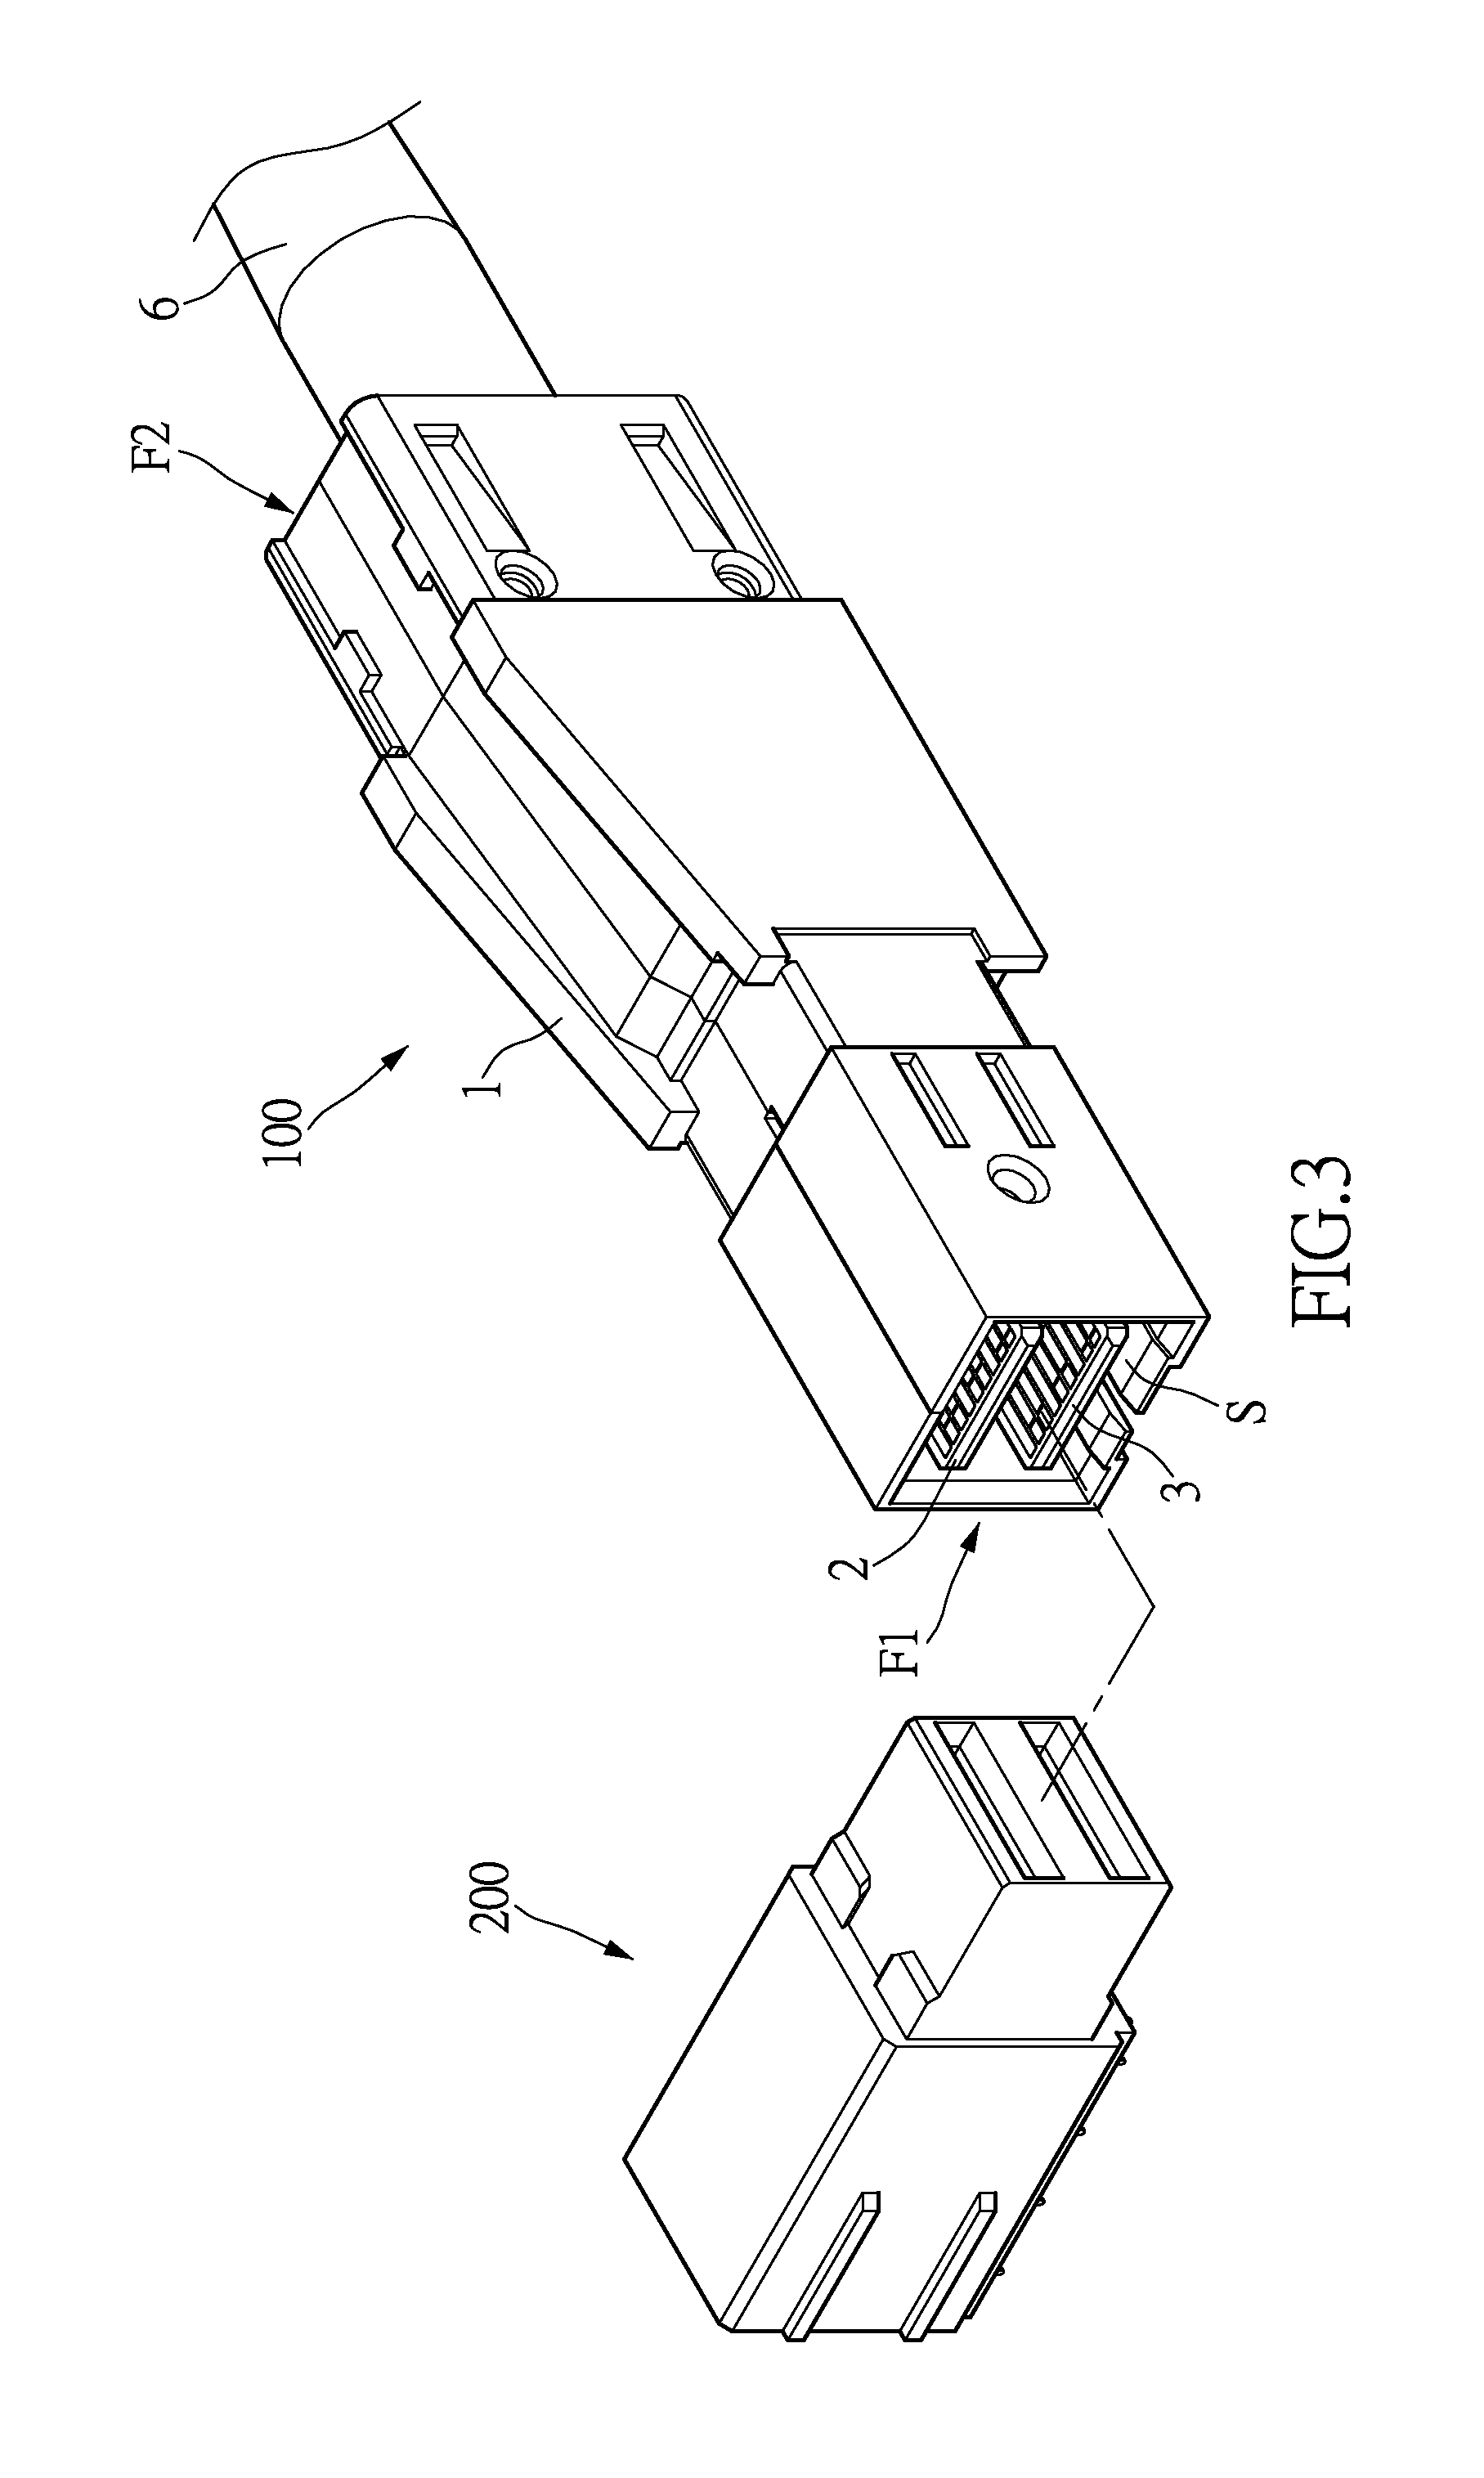 Bi-directional data transmission method, high-frequency connector and optical connector using the same